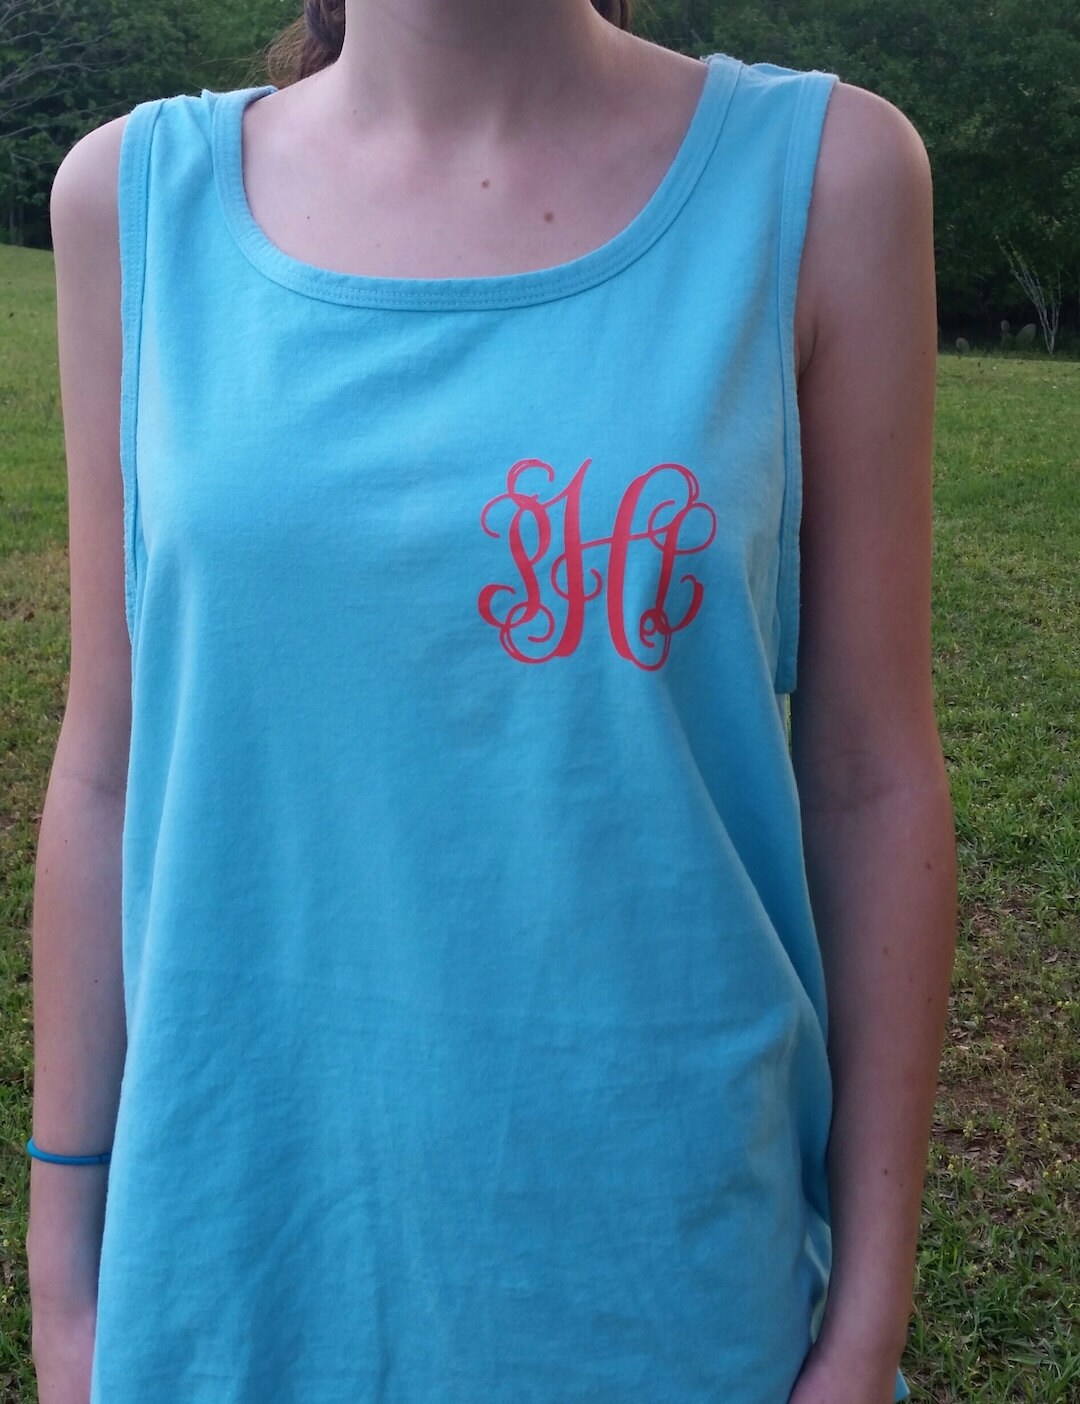 Ready to ship Comfort Colors Tank Small by BeachyMommas on Etsy